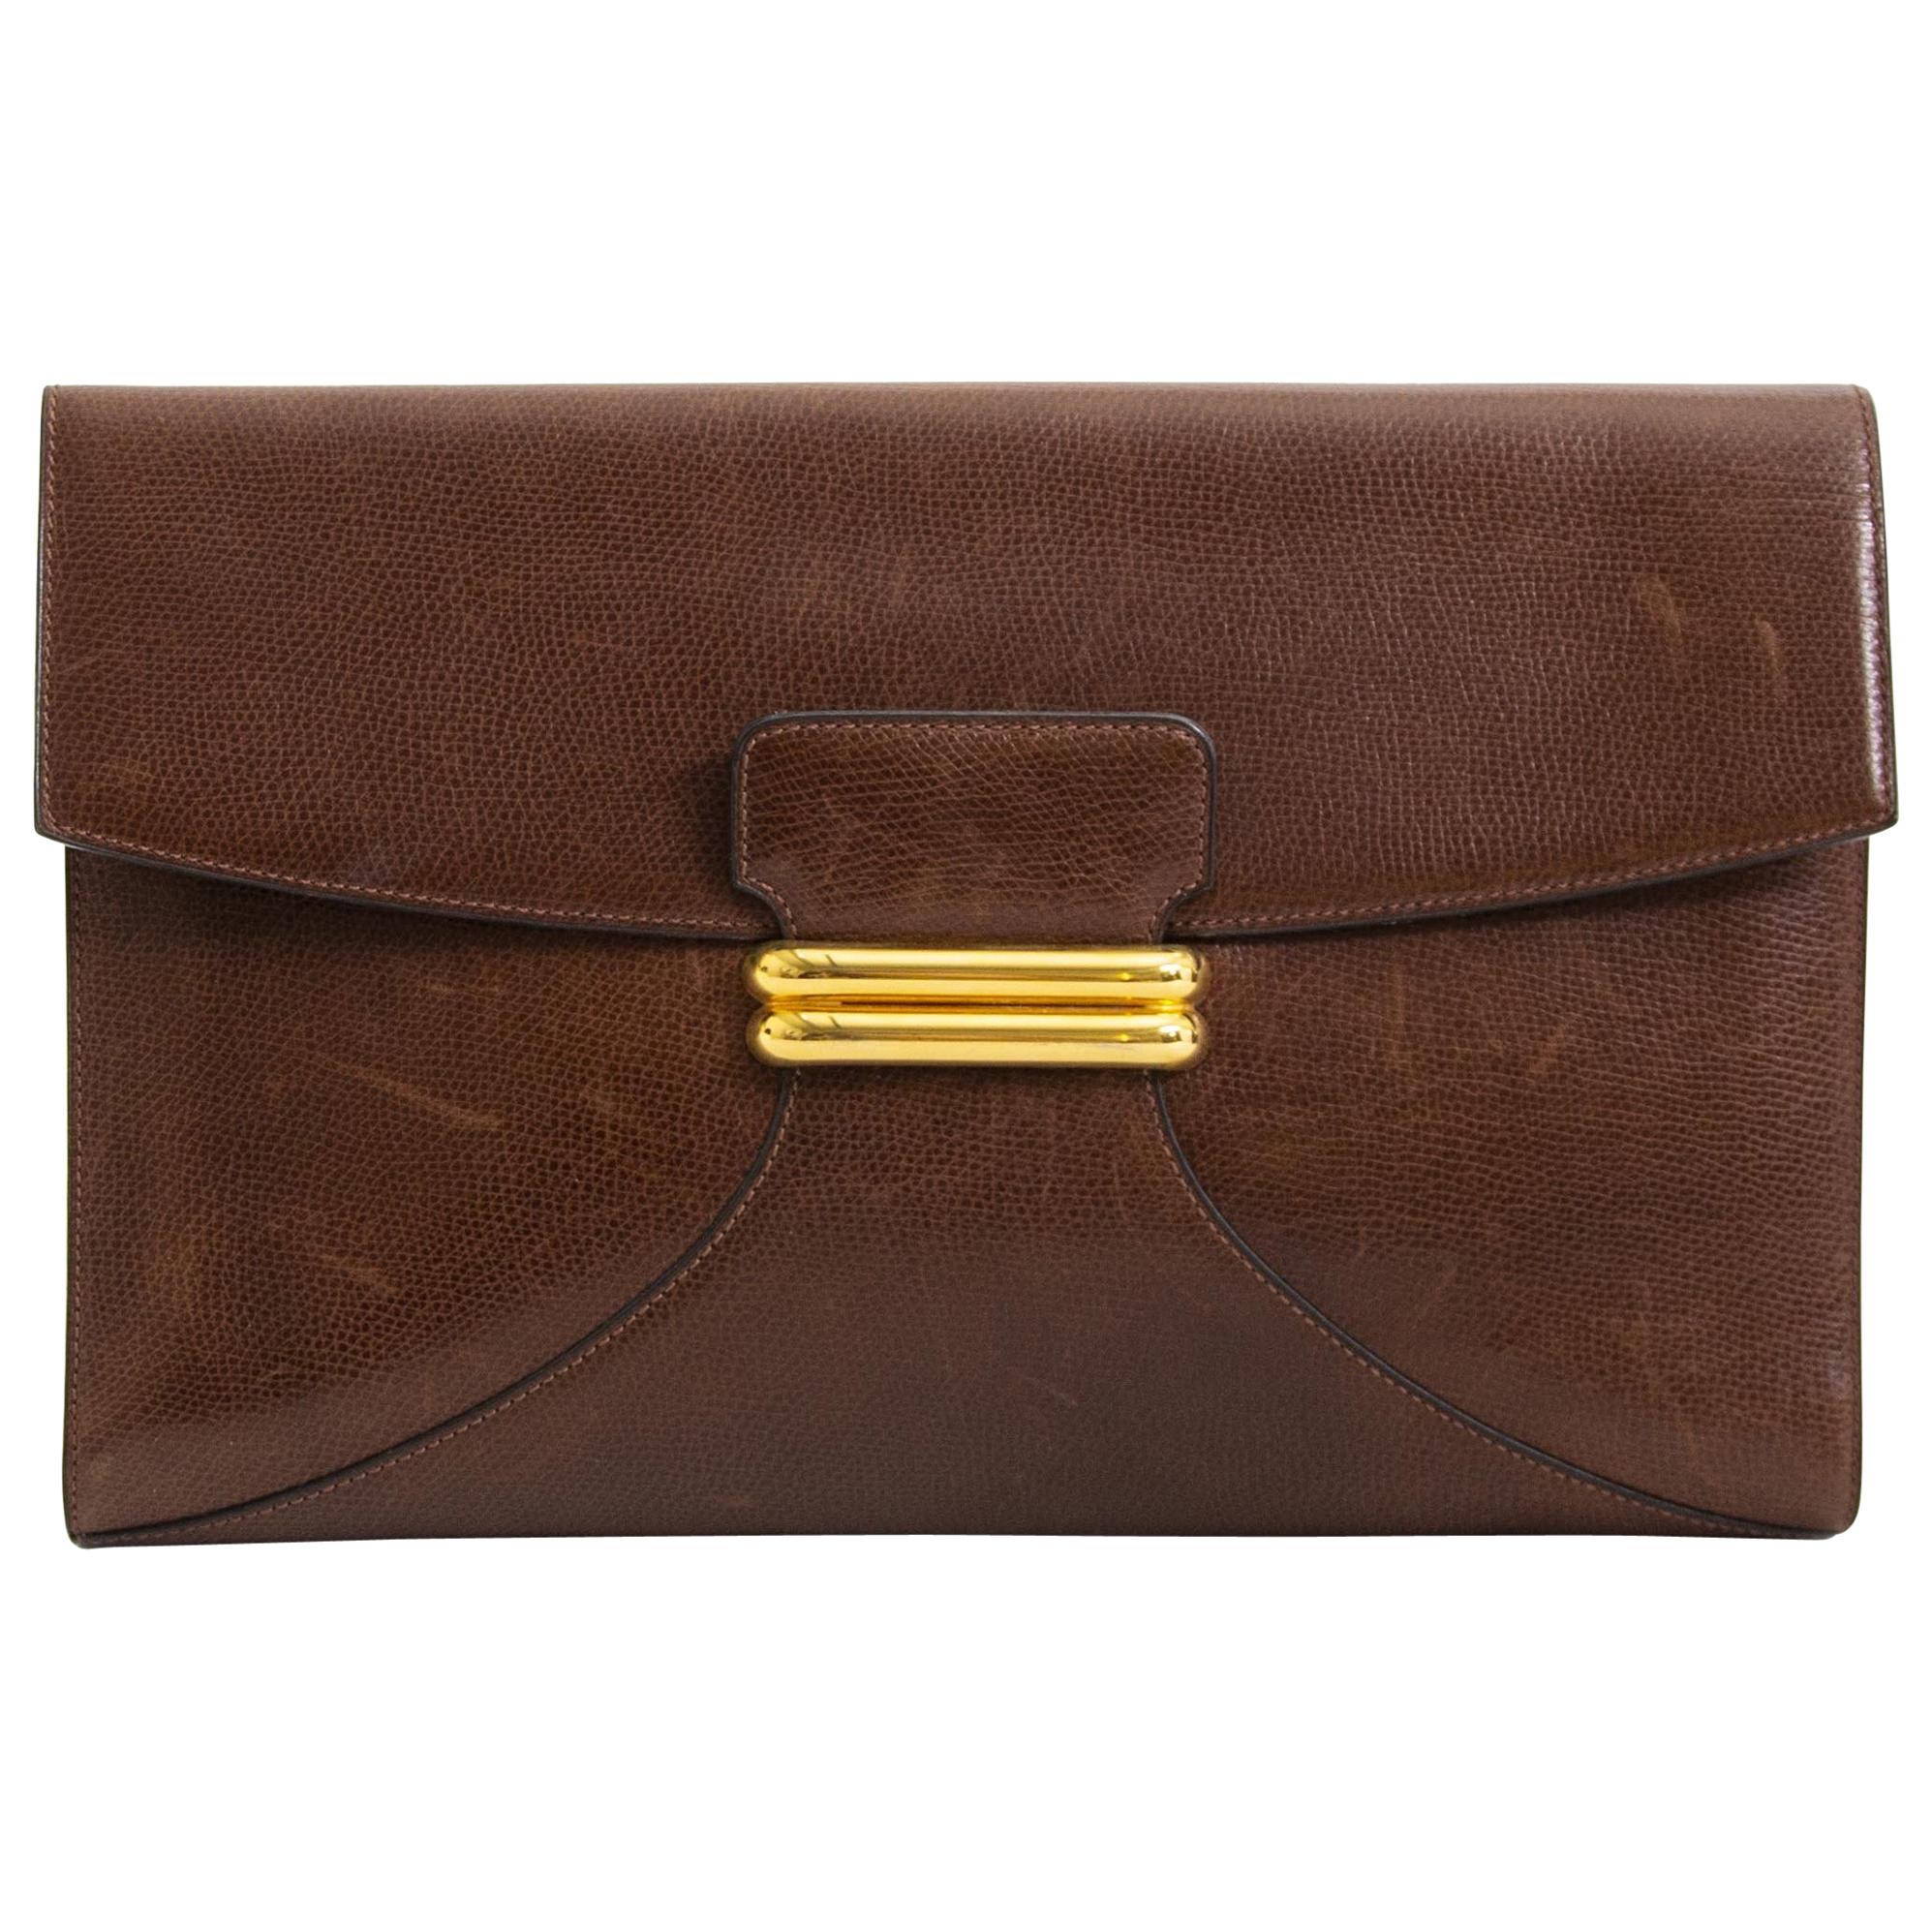 Delvaux Brown Leather Clutch